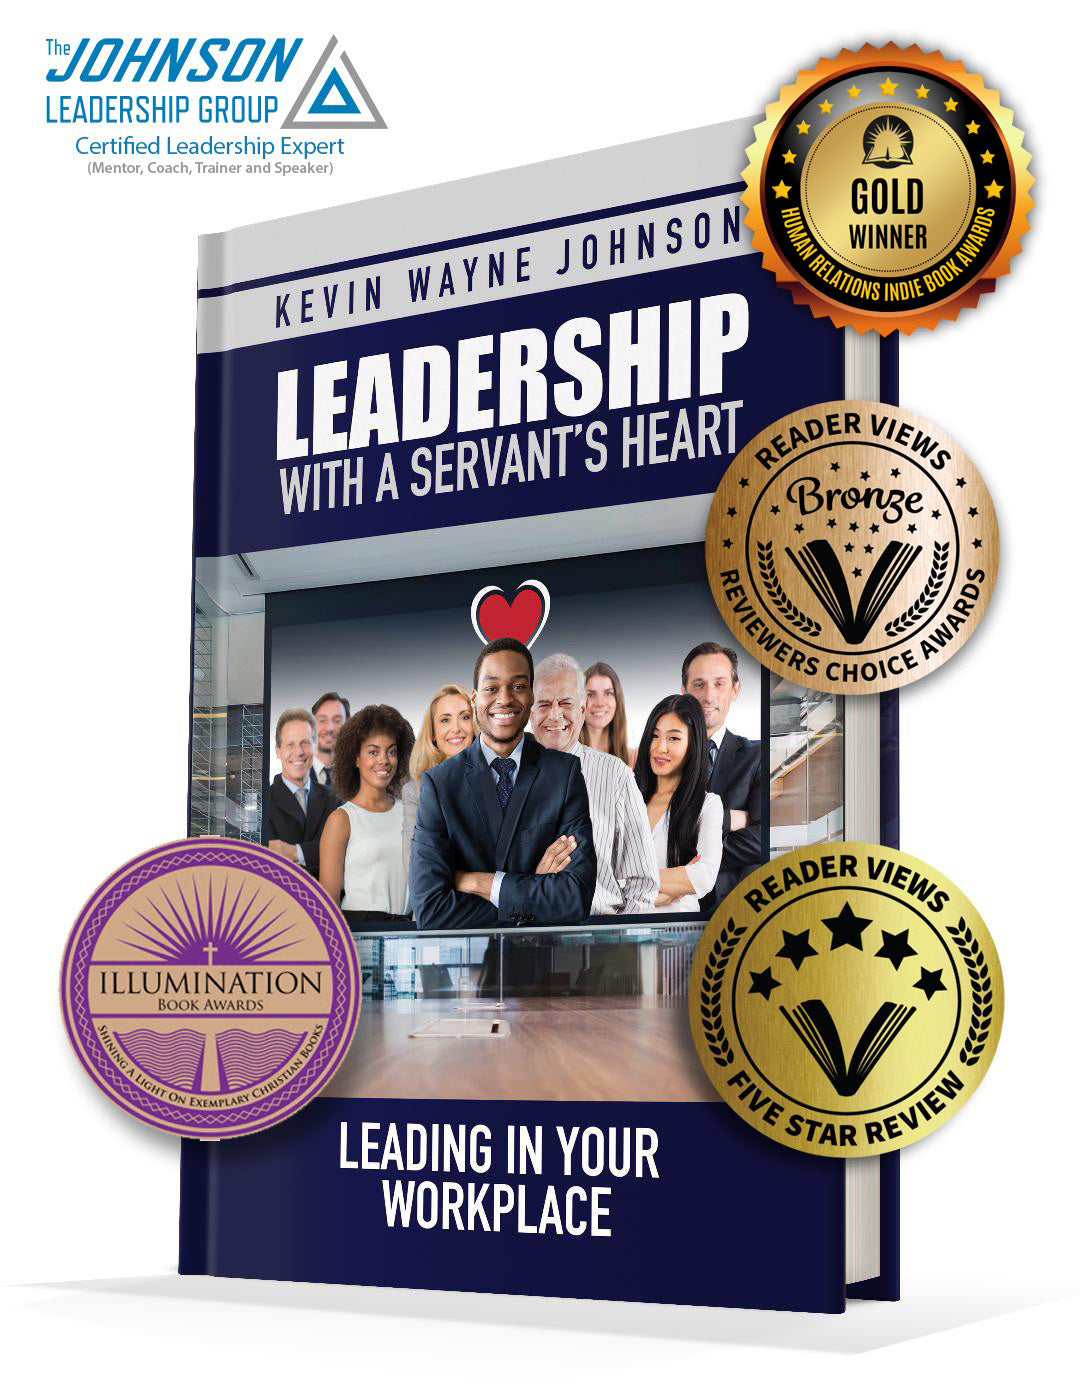 Leadership With A Servant's Heart: Leading in Your Workplace